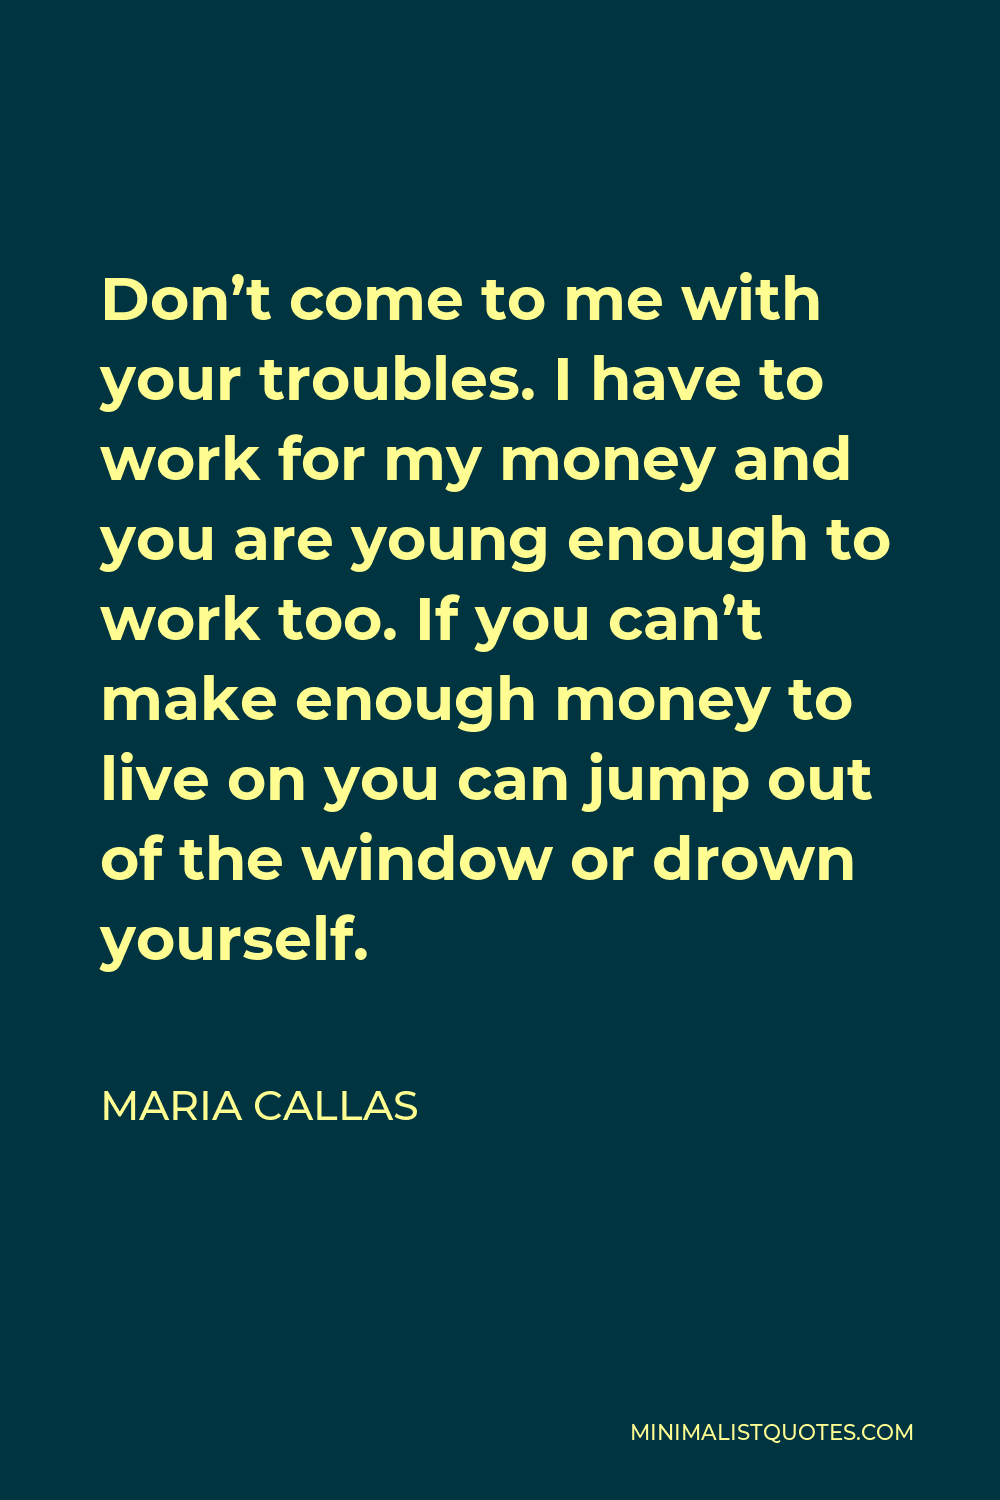 Maria Callas Quote - Don’t come to me with your troubles. I have to work for my money and you are young enough to work too. If you can’t make enough money to live on you can jump out of the window or drown yourself.